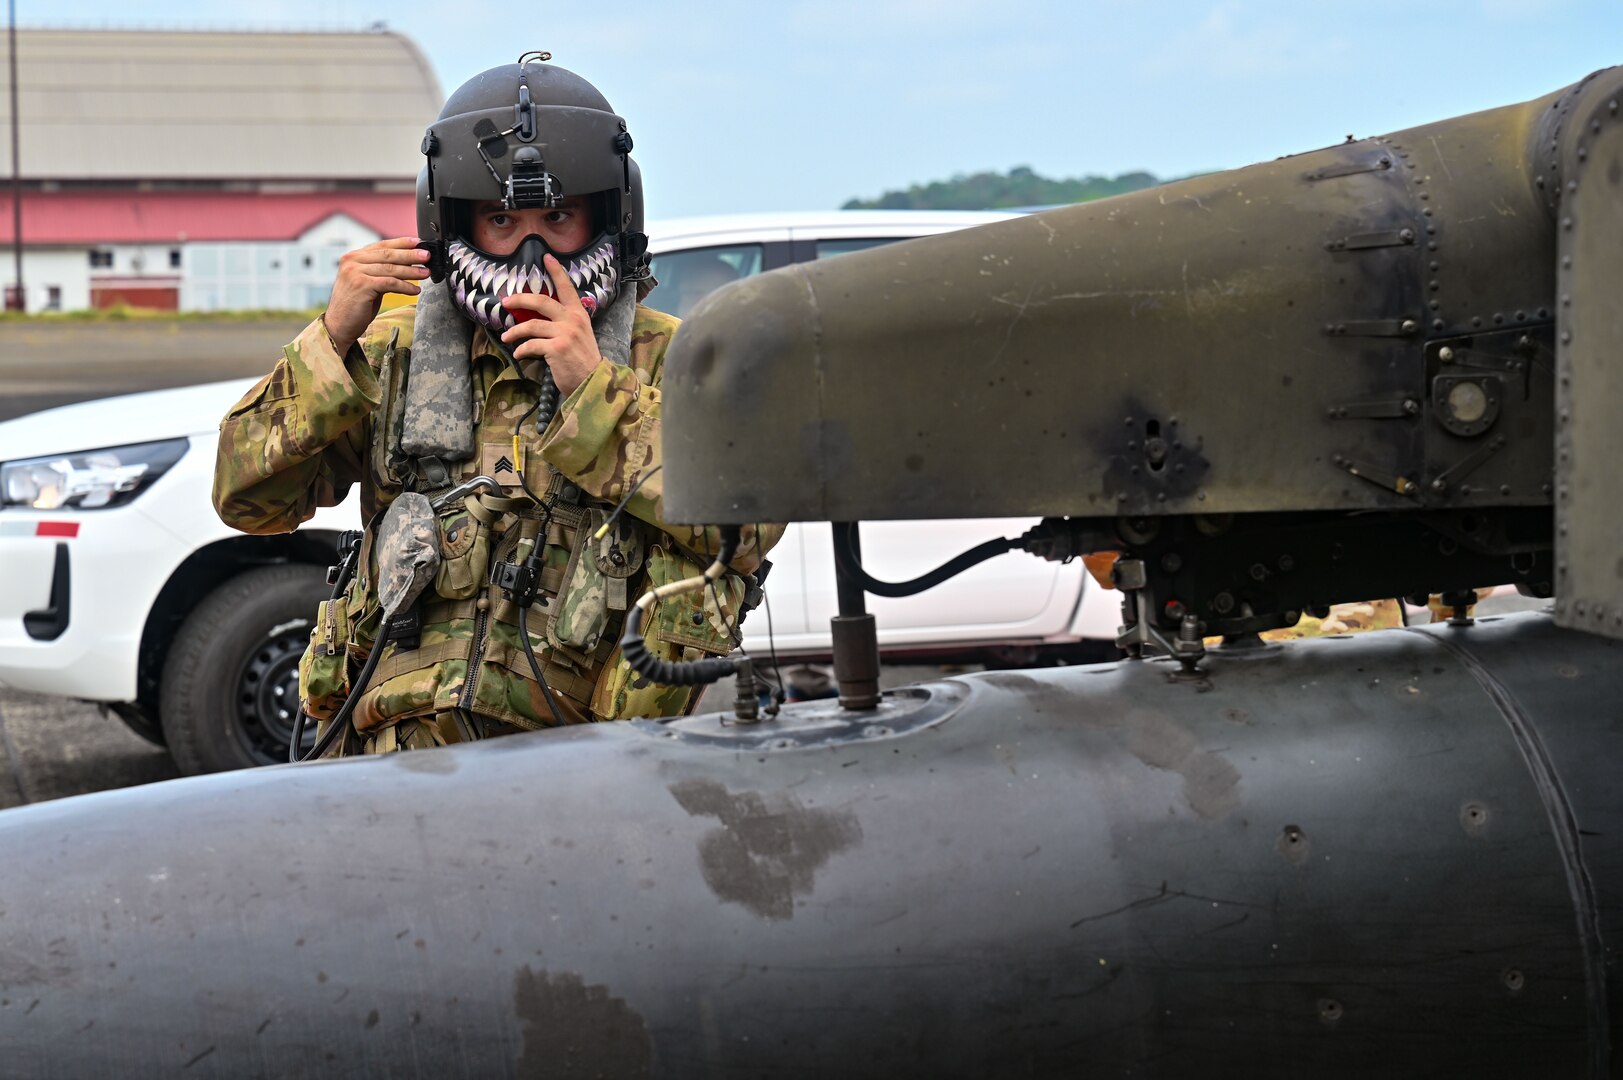 U.S. Army Sgt. Tucker Sarkissian, 1st Battalion, 228th Aviation Regiment UH-60 Black Hawk crew chief, affixes his helmet mandible guard prior to takeoff at the Panama Pacific International Airport May 6, 2023.